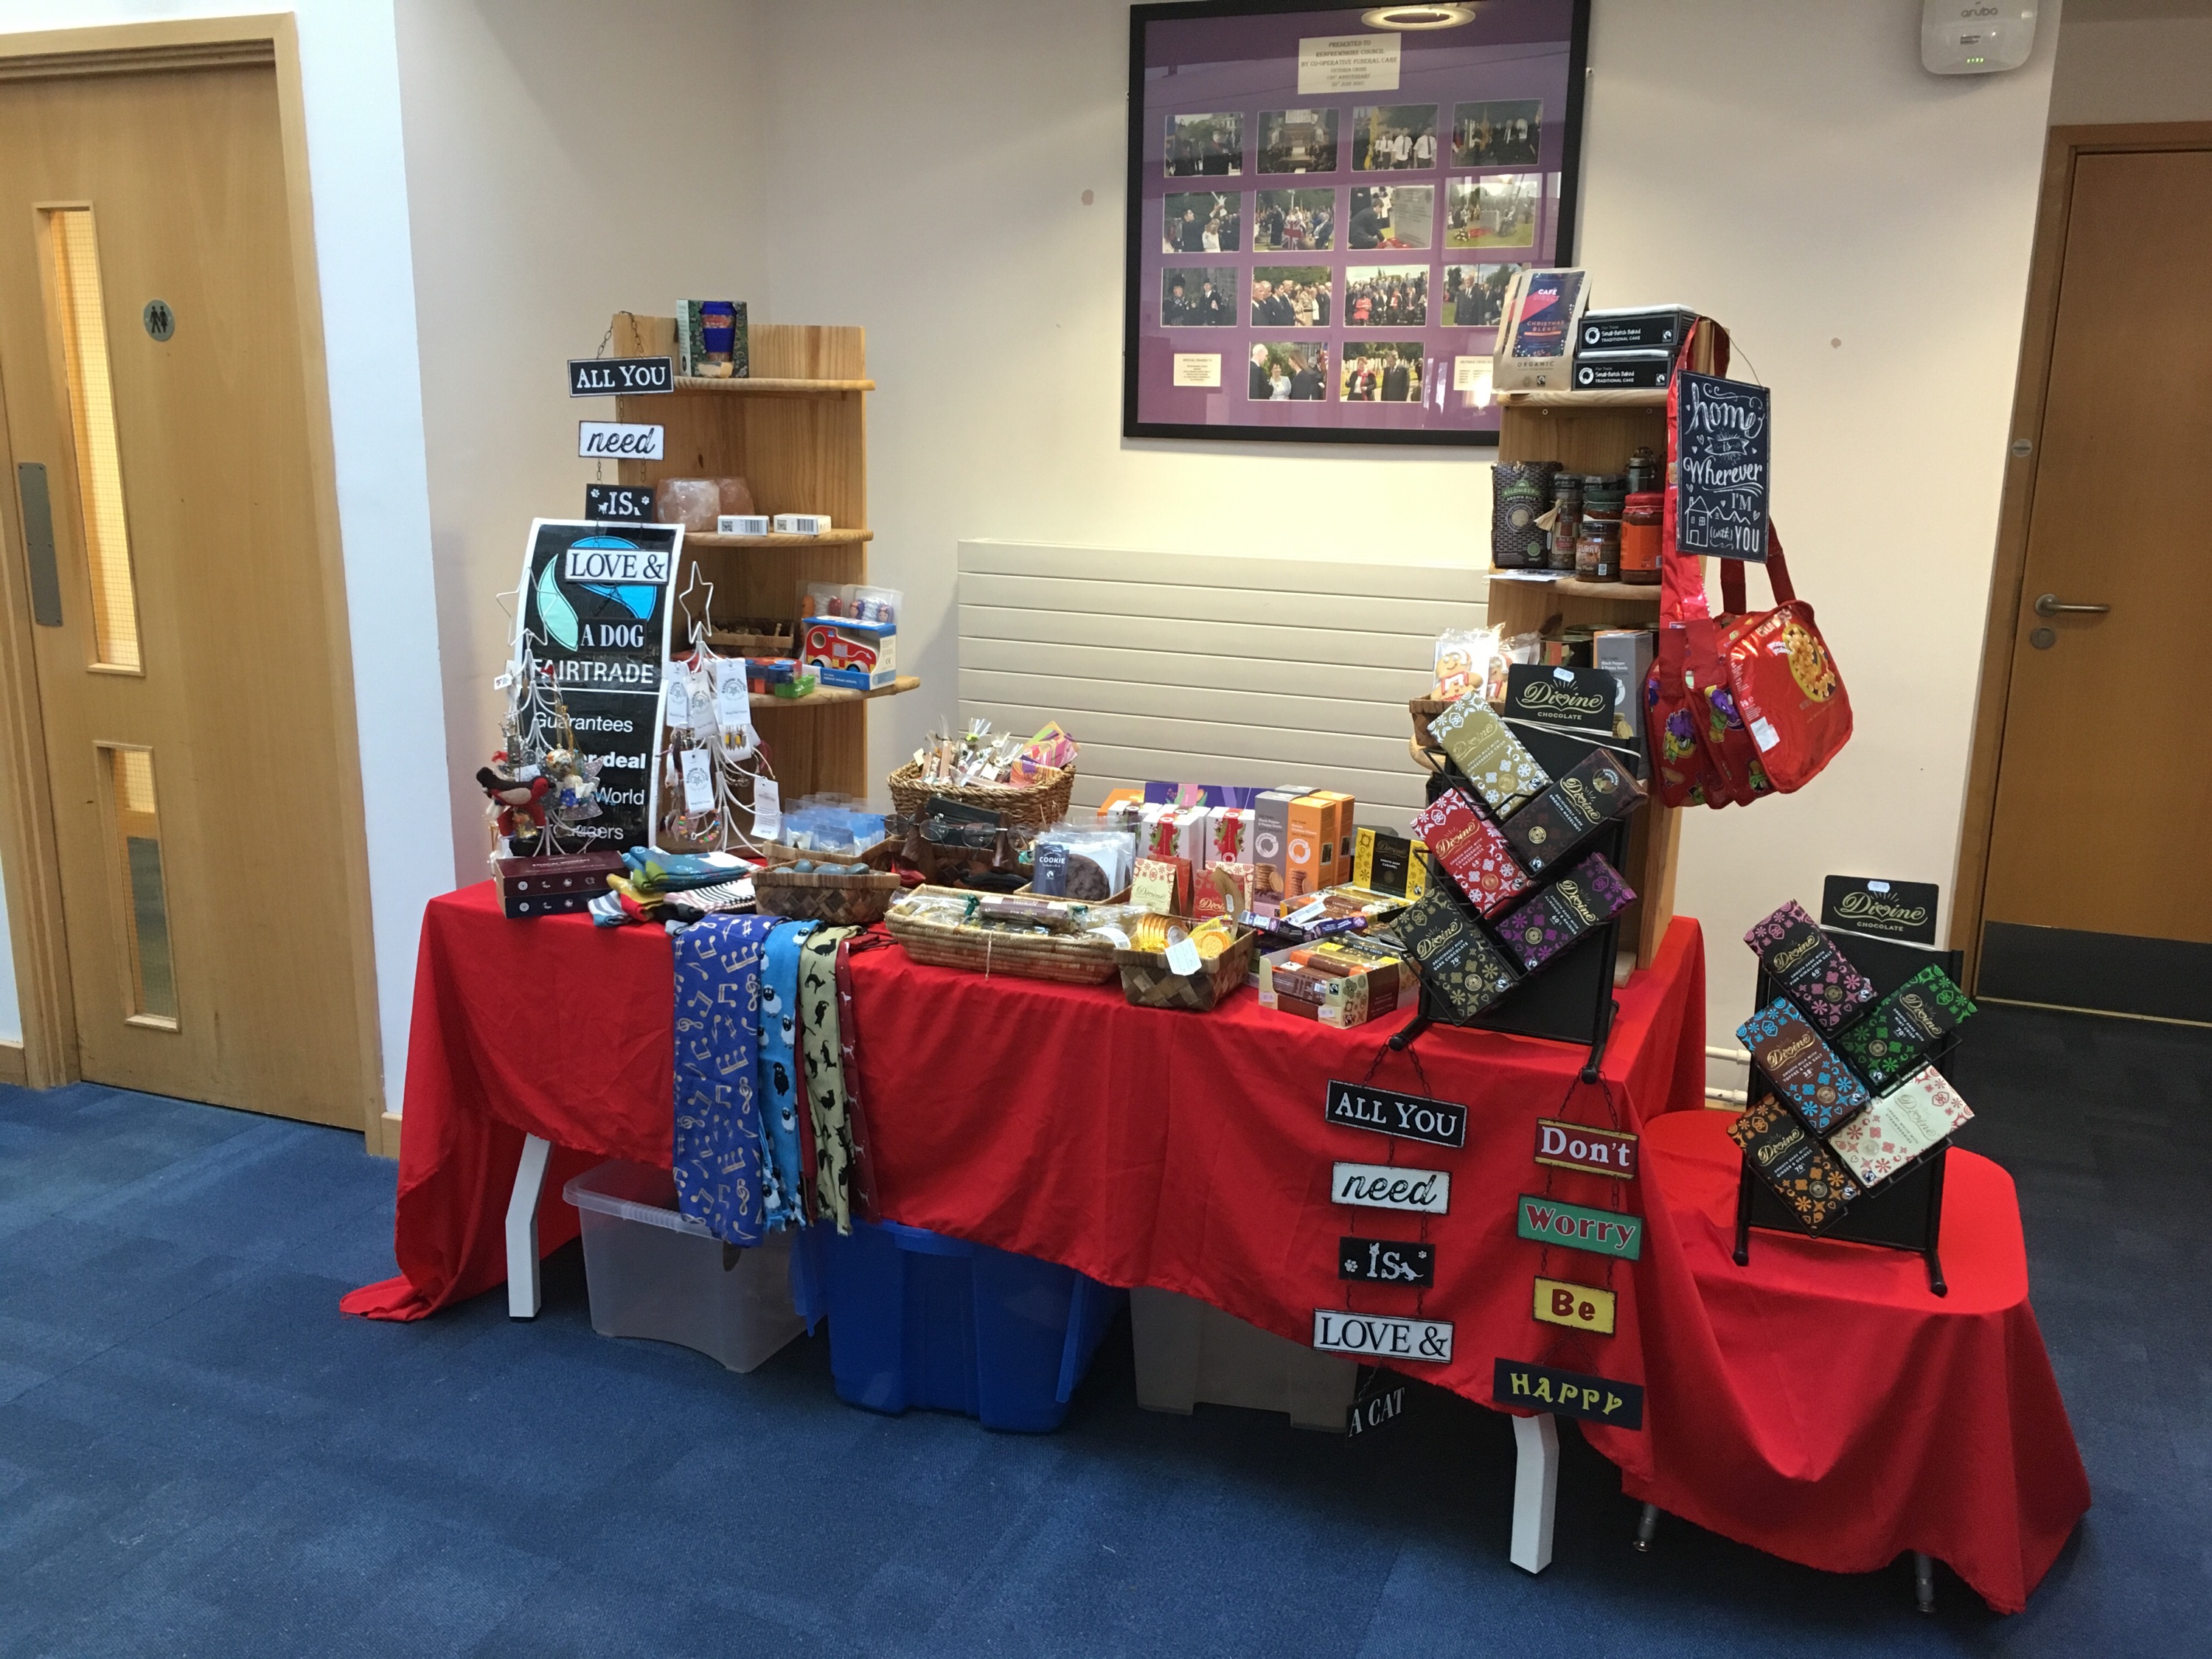 Stall displaying fair trade items including chocolate, scarves, biscuits and wall hangings